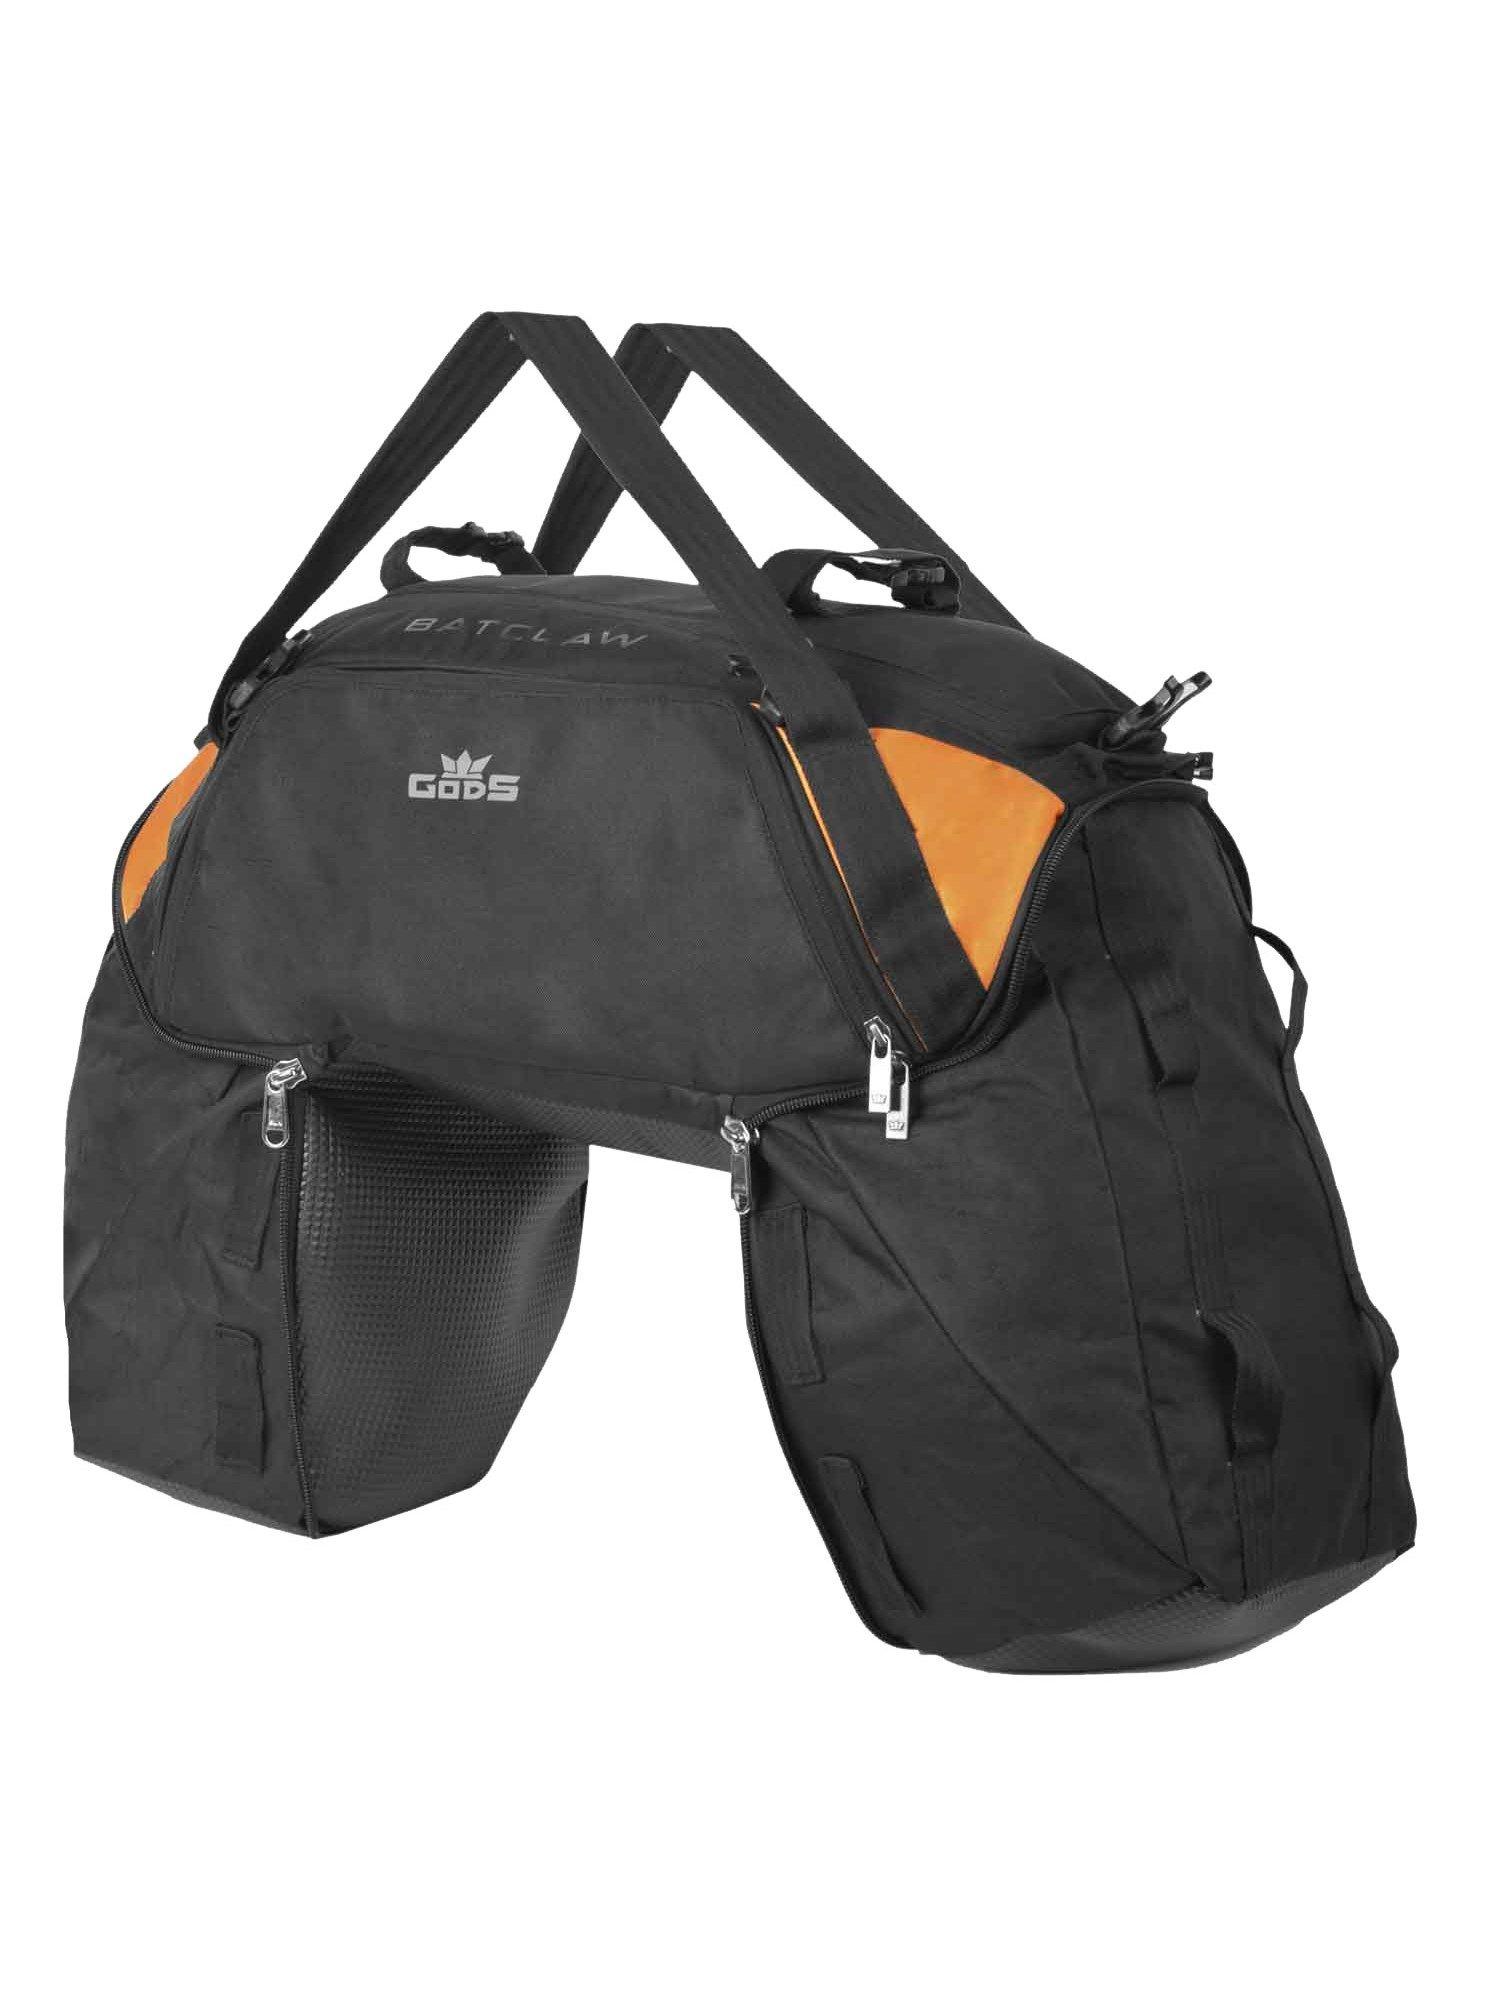 batclaw - 75 litre 3 in 1 duffle & travel tail bag for motorcycle